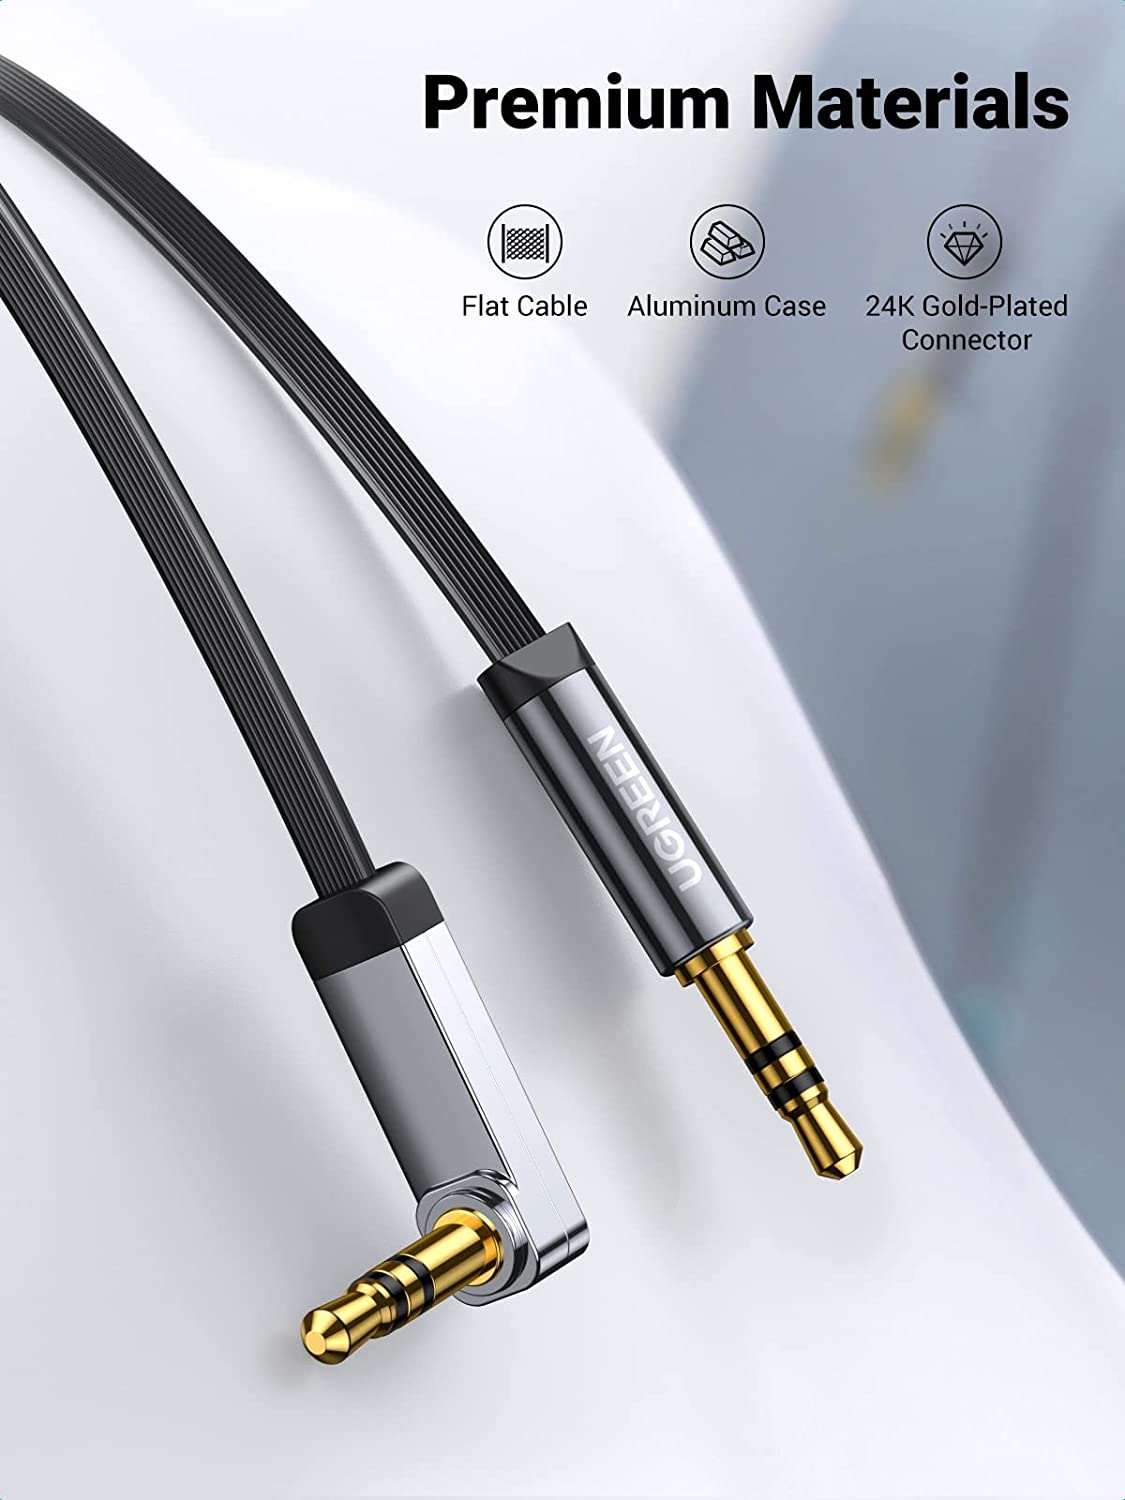 UGREEN 3.5mm Auxiliary Audio Jack to Jack Cable 90 Degree Right Angle for Apple iPhone, iPod, iPad, Samsung,Smartphones & Tablets and Speakers,24K Gold Plated Male to Male 10596 - Hatke